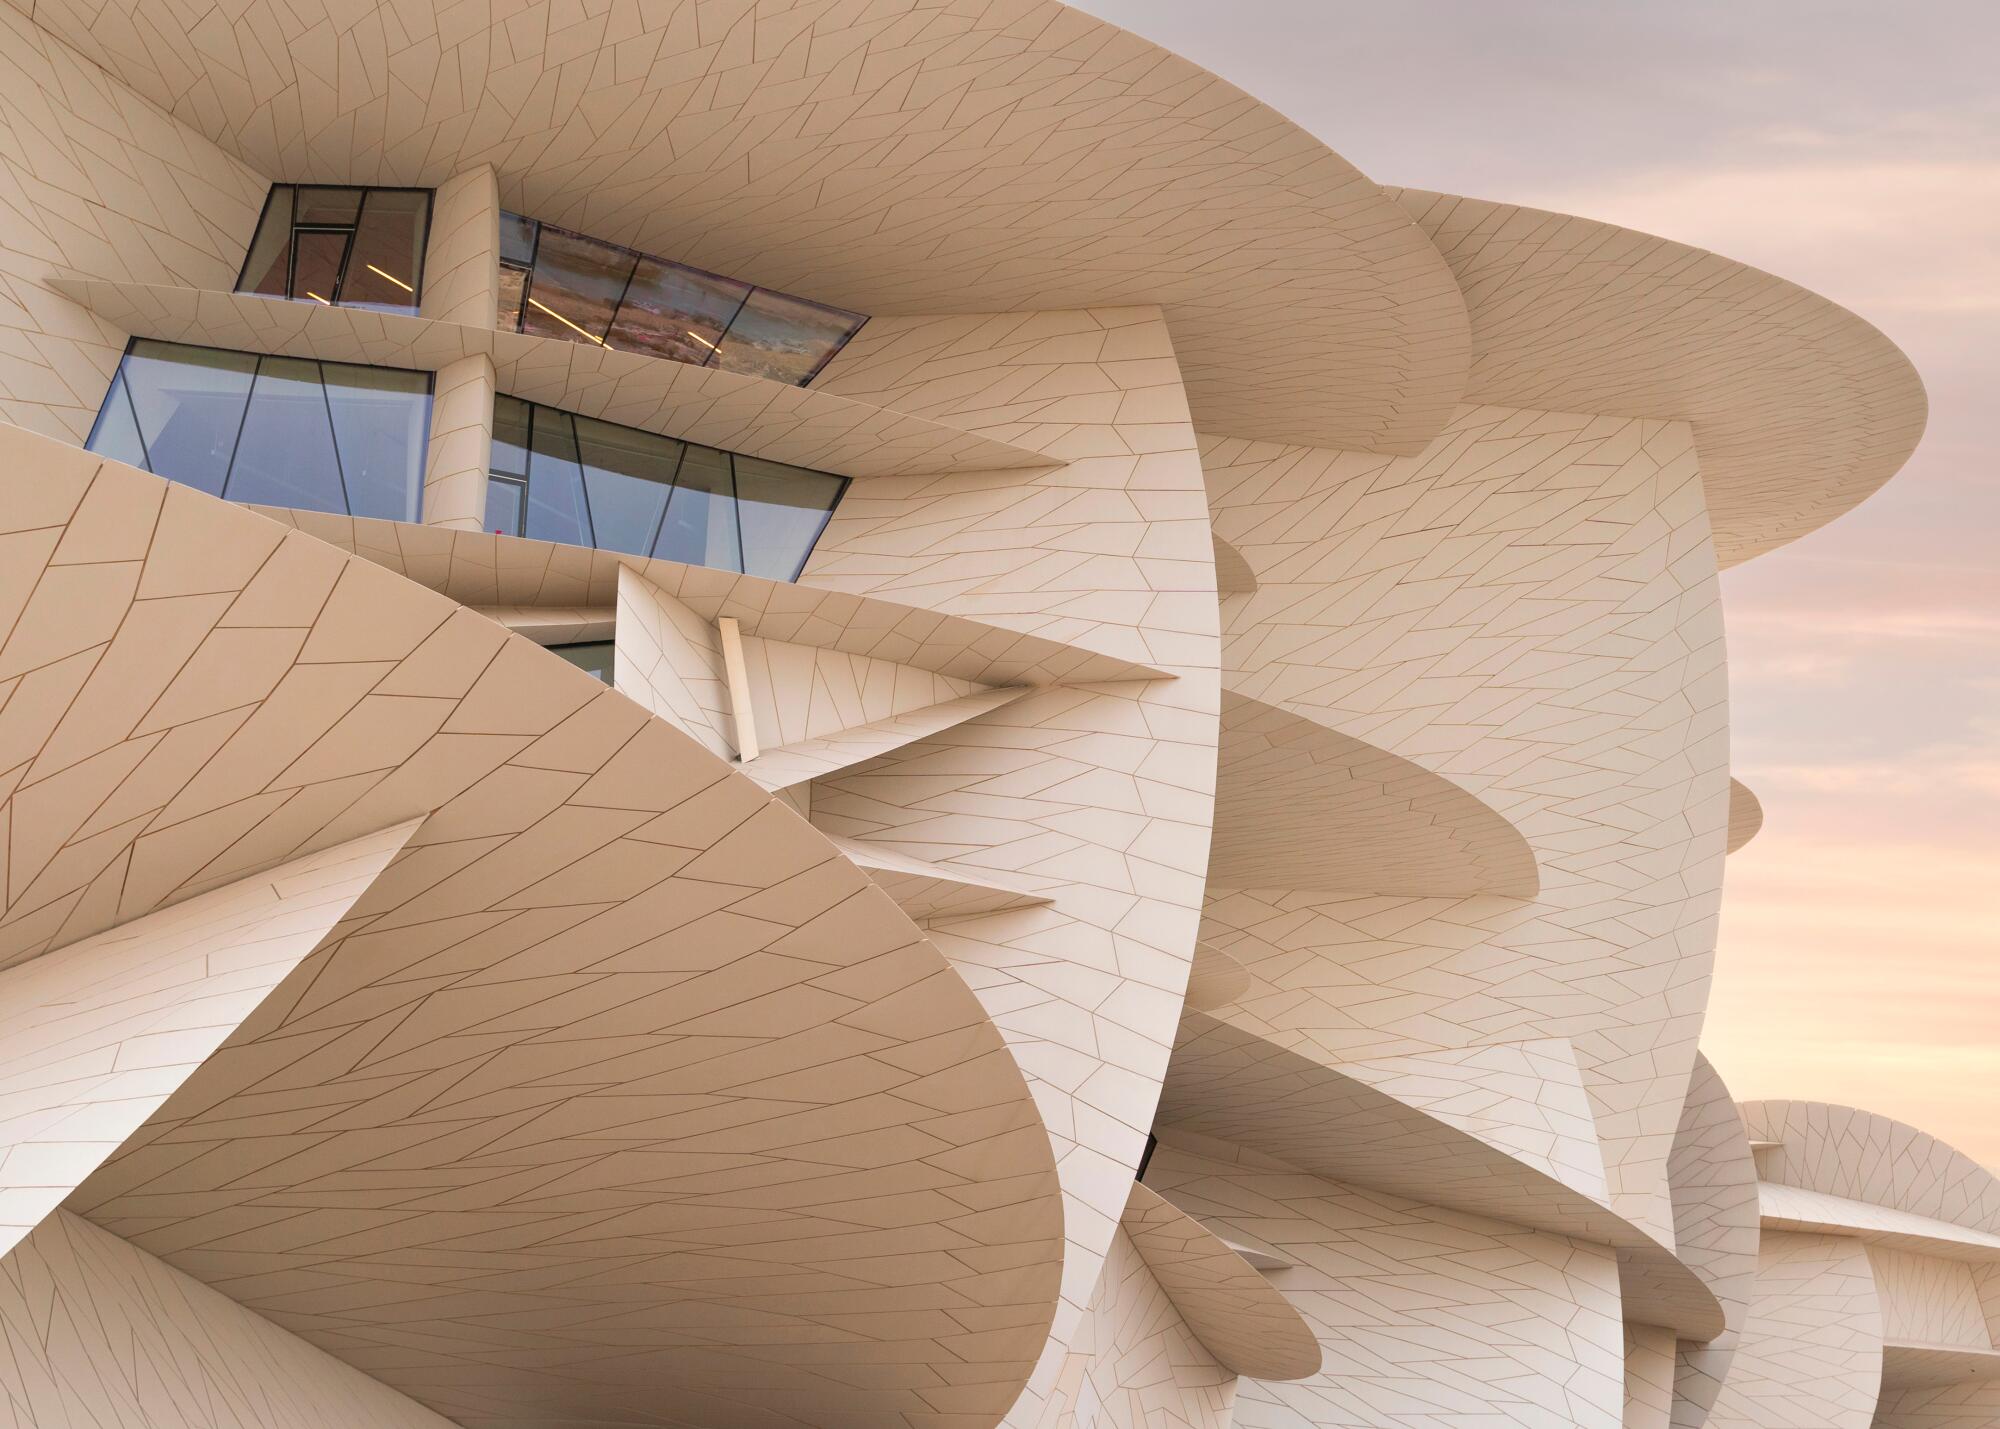 The National Museum of Qatar is a national museum in Doha, Qatar.